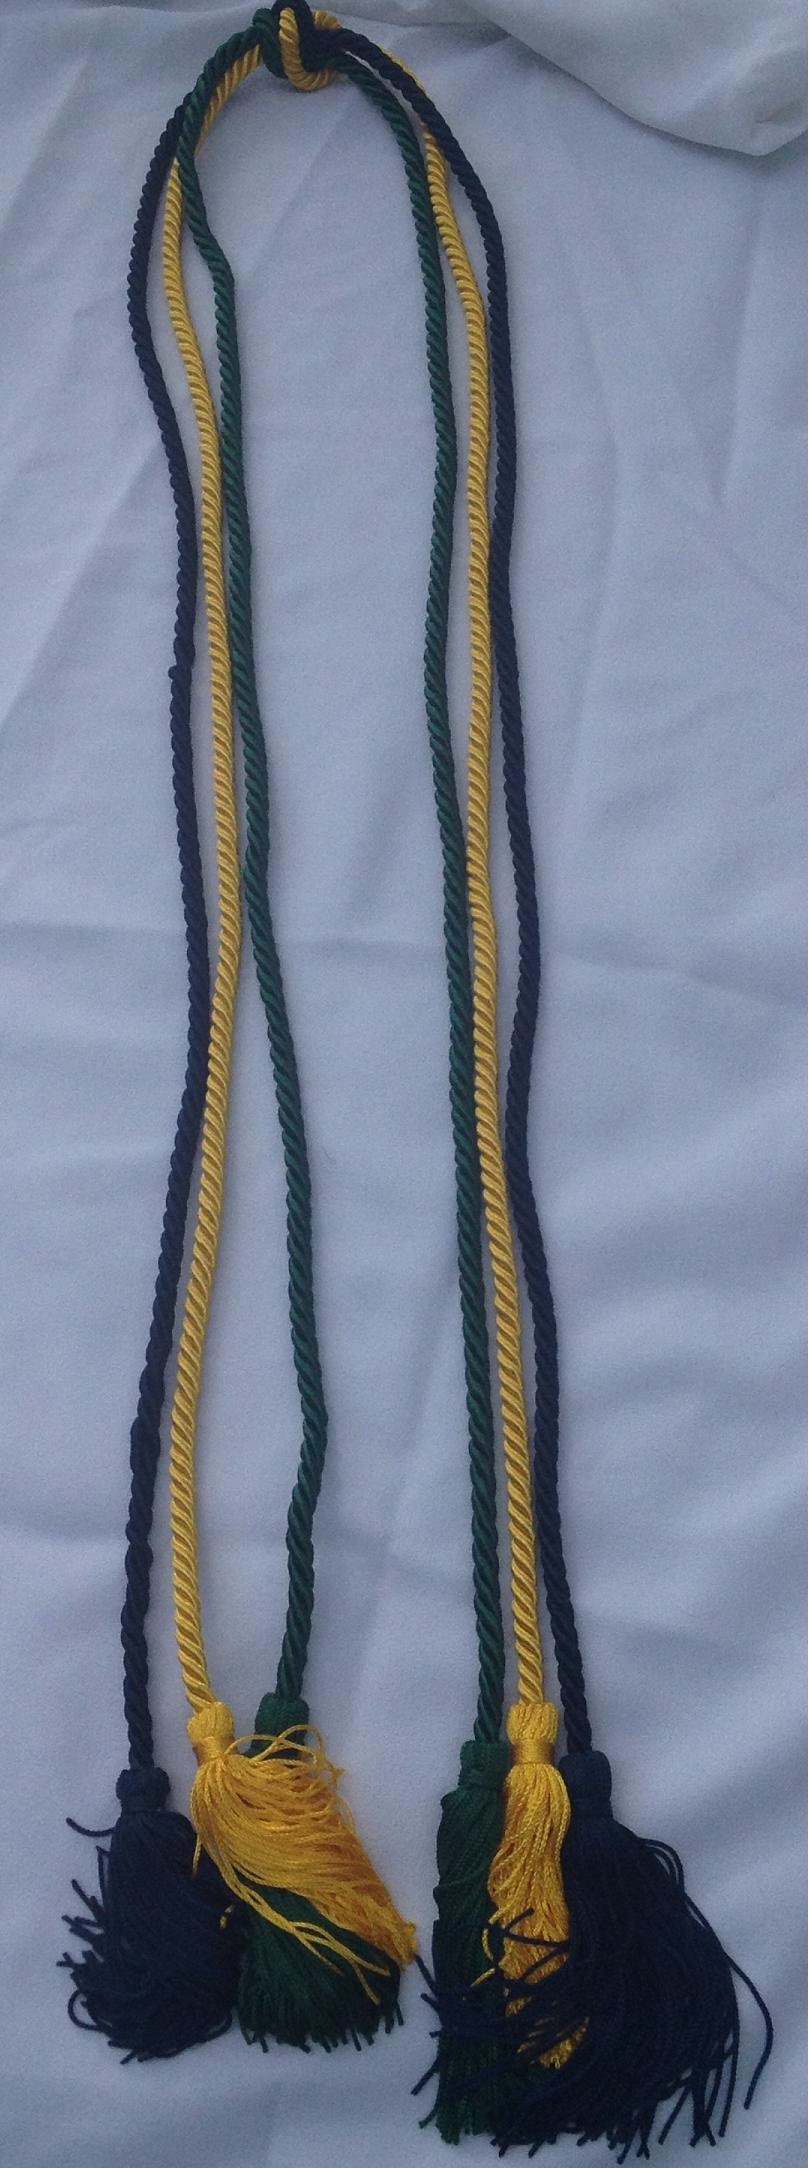 Three Separate Honor Cords